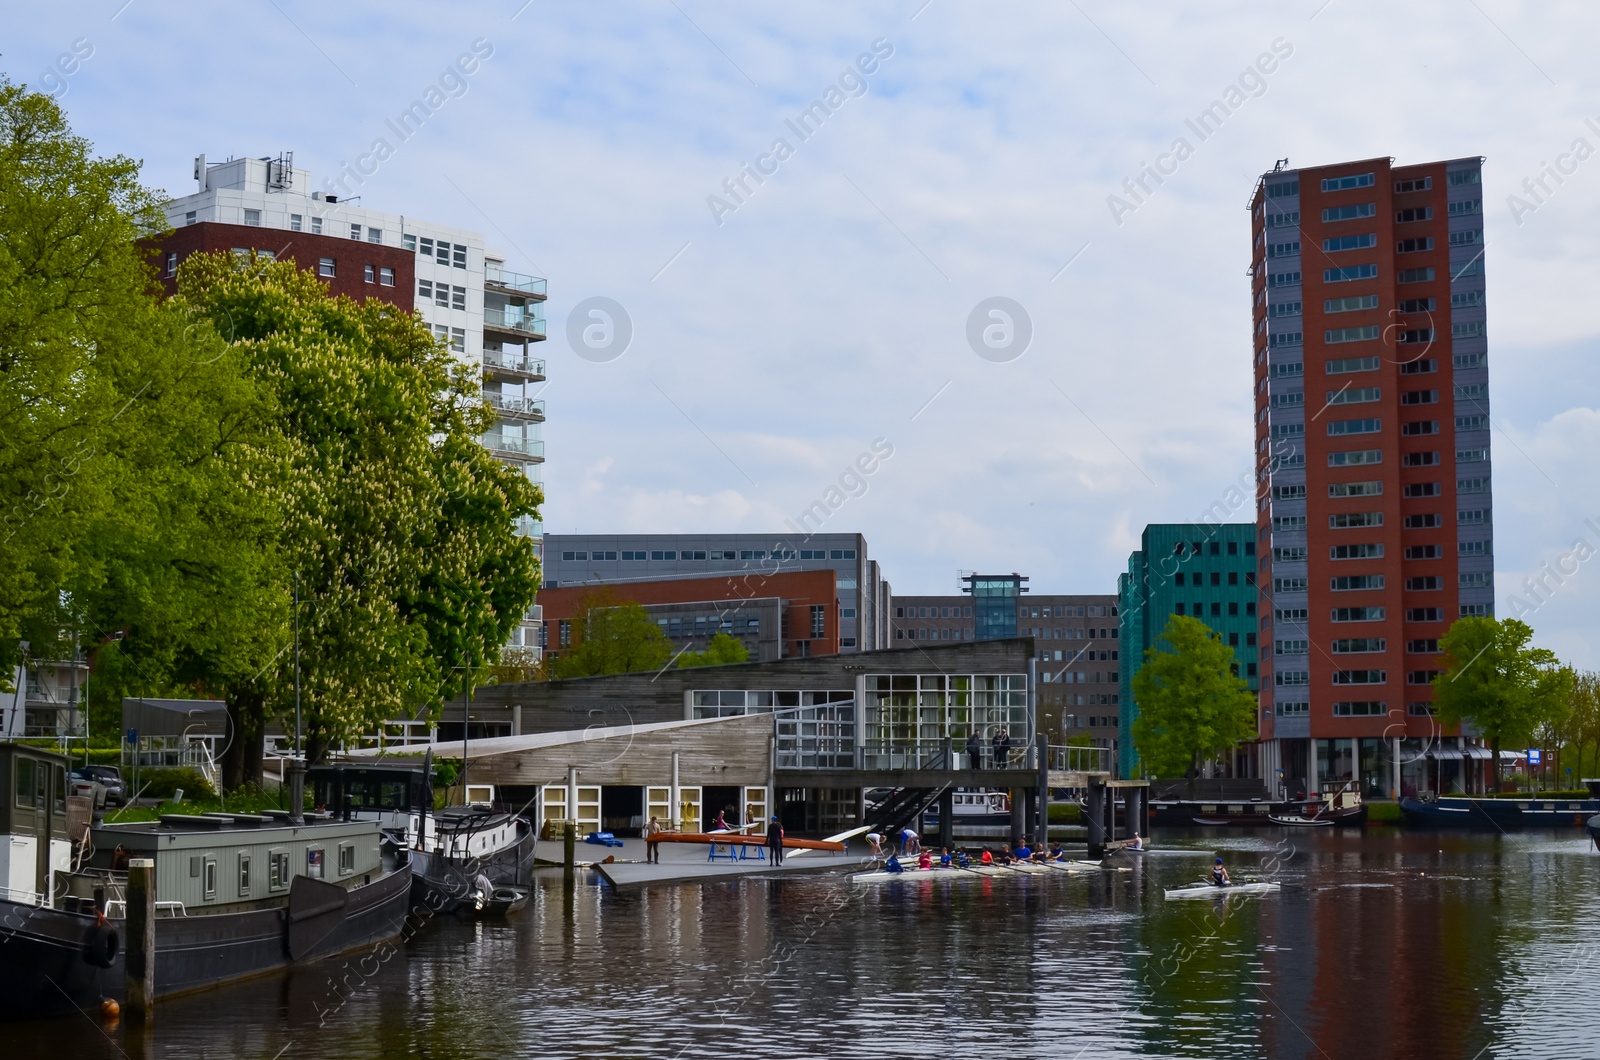 Photo of Beautiful view of houses and city canal with boats